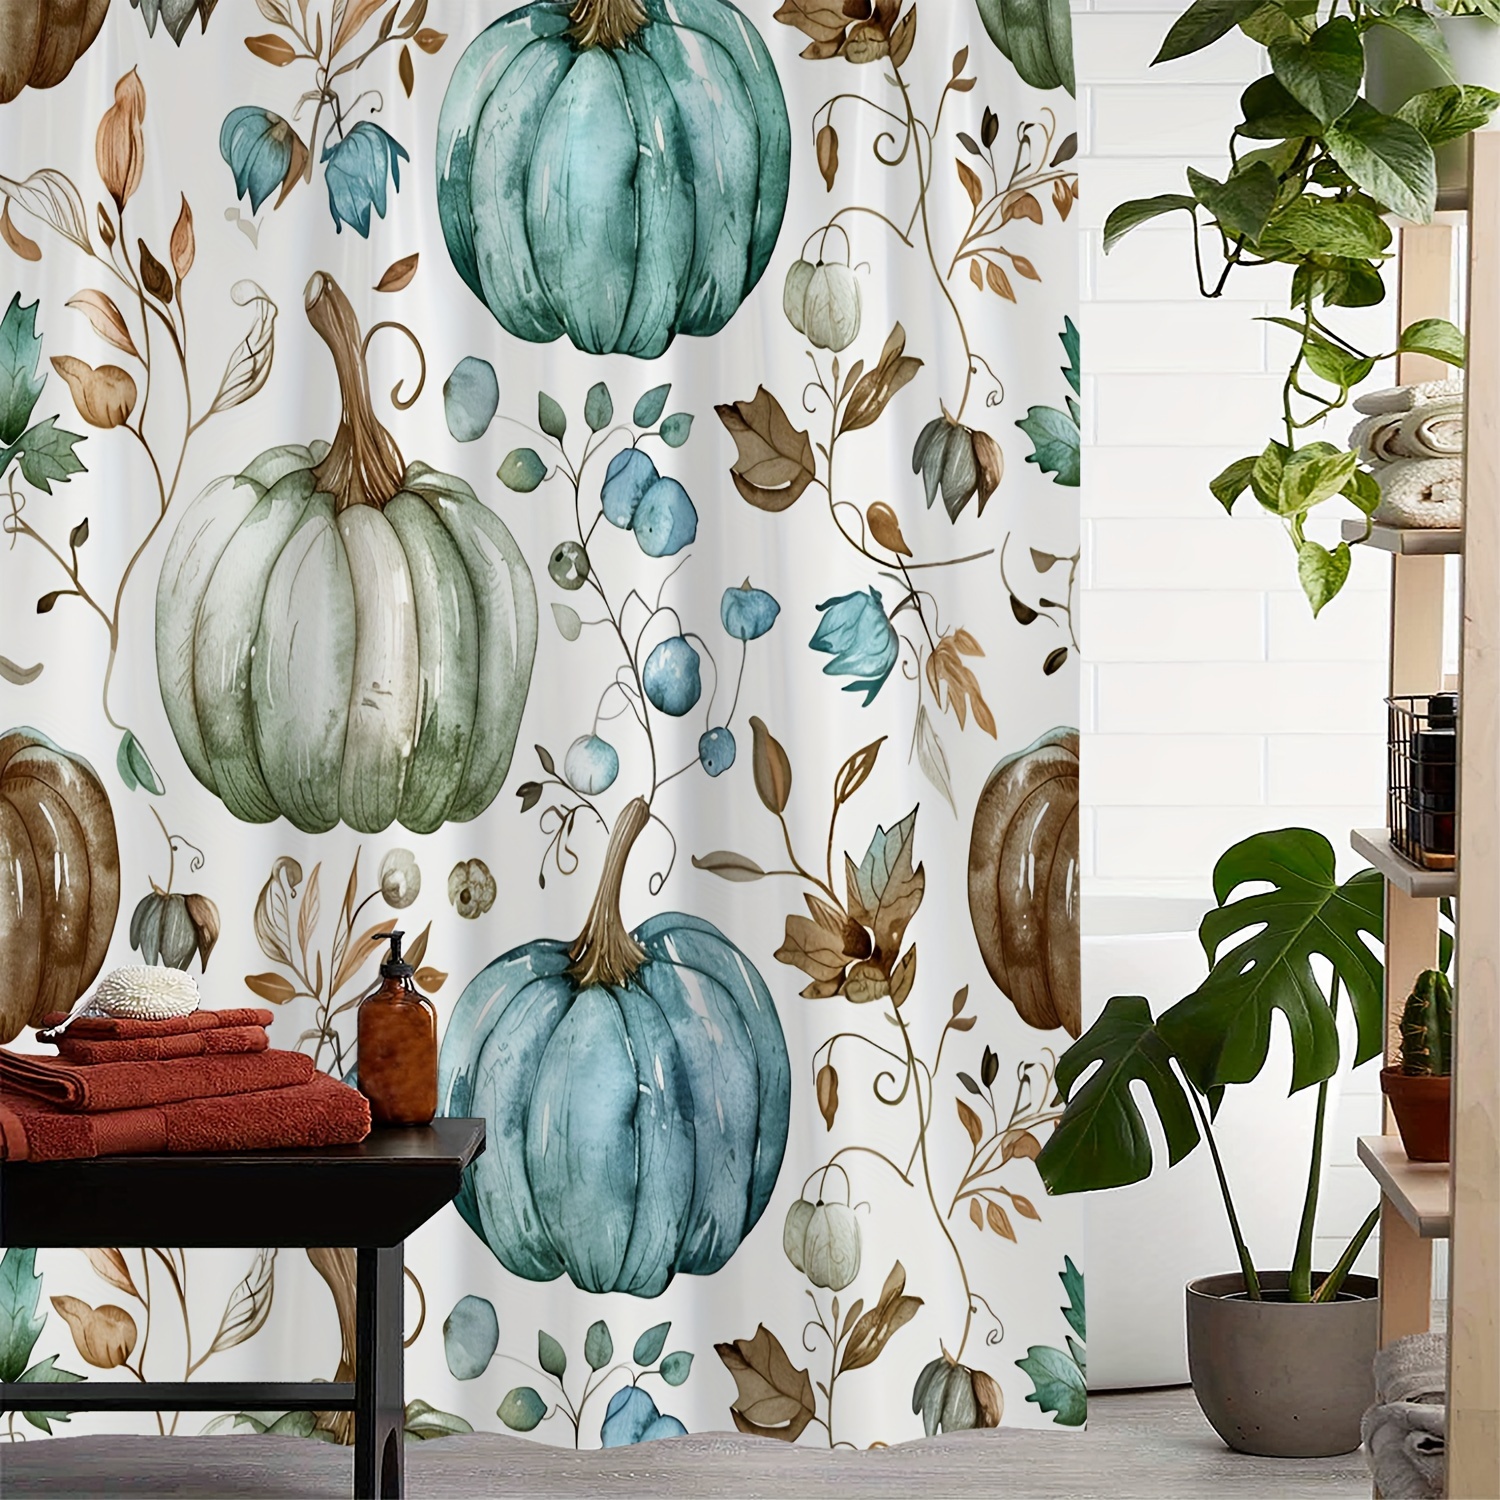 

Water-resistant Polyester Shower Curtain With Leaf Pumpkin Print, Machine Washable, Artistic Design, Includes 12 Hooks - Woven Fabric, Water-repellent, Decorative Bathroom Accessory